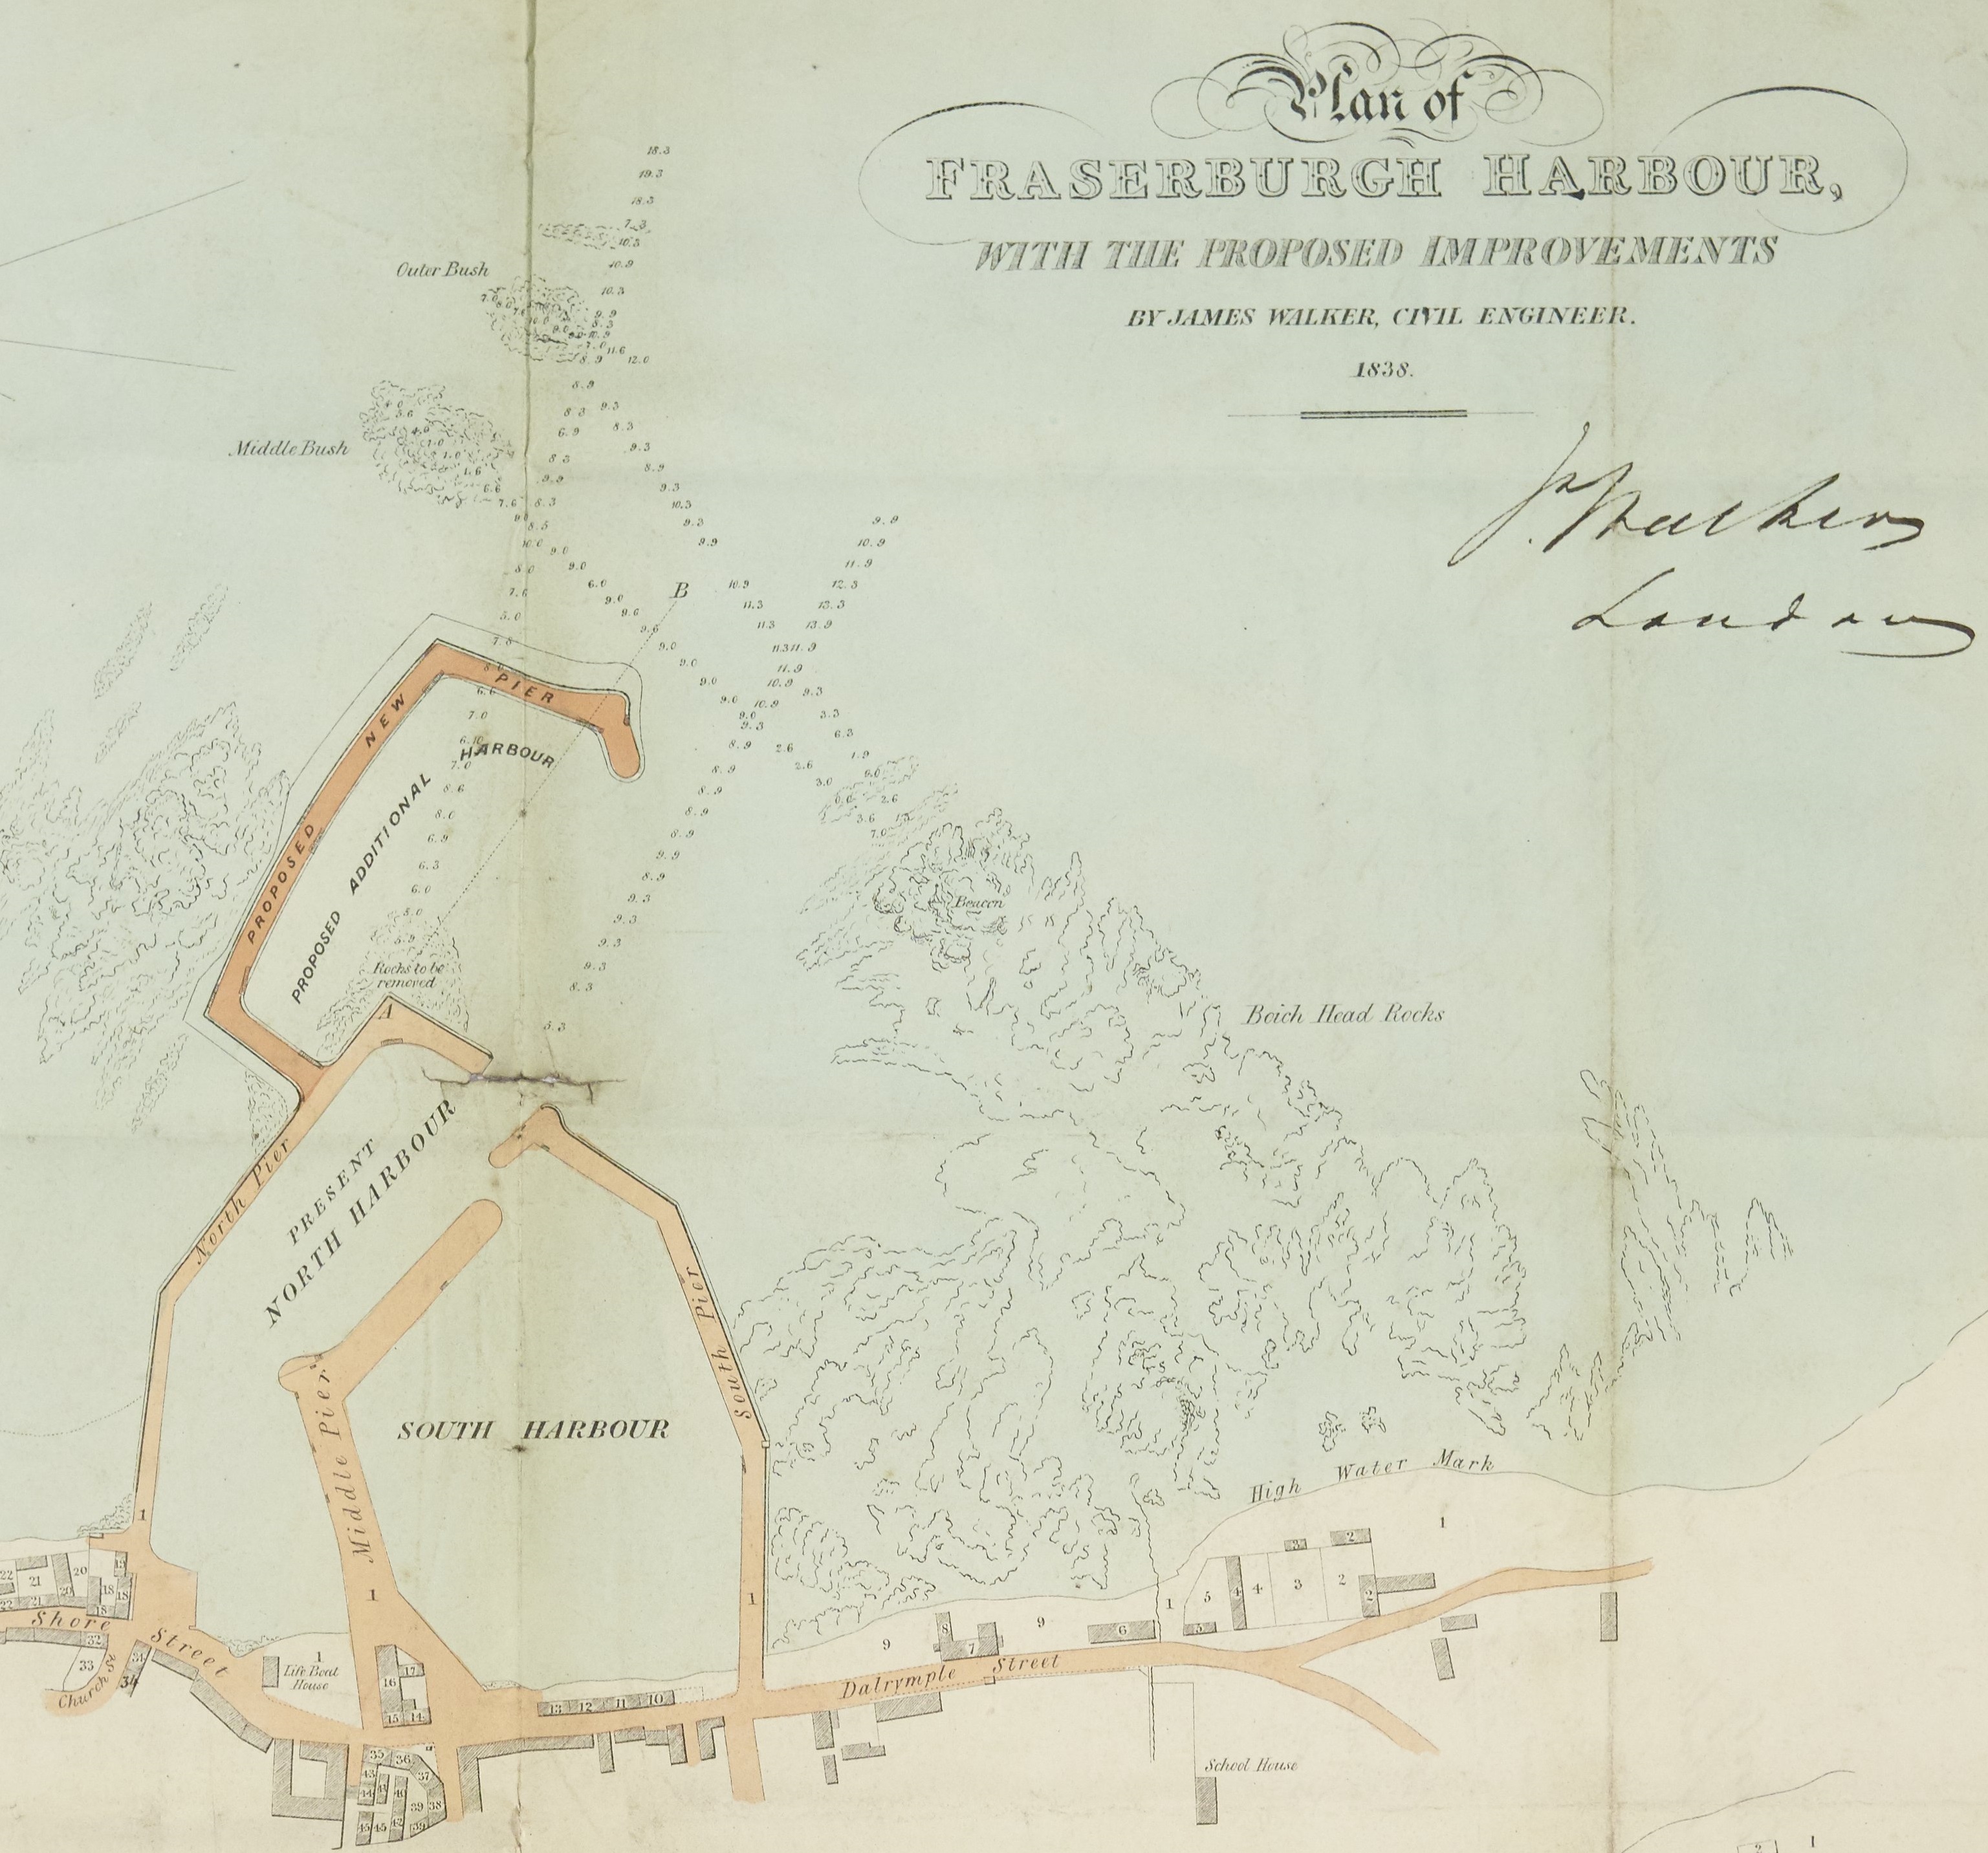 Detail of a plan of Fraserburgh Harbour showing proposed improvements